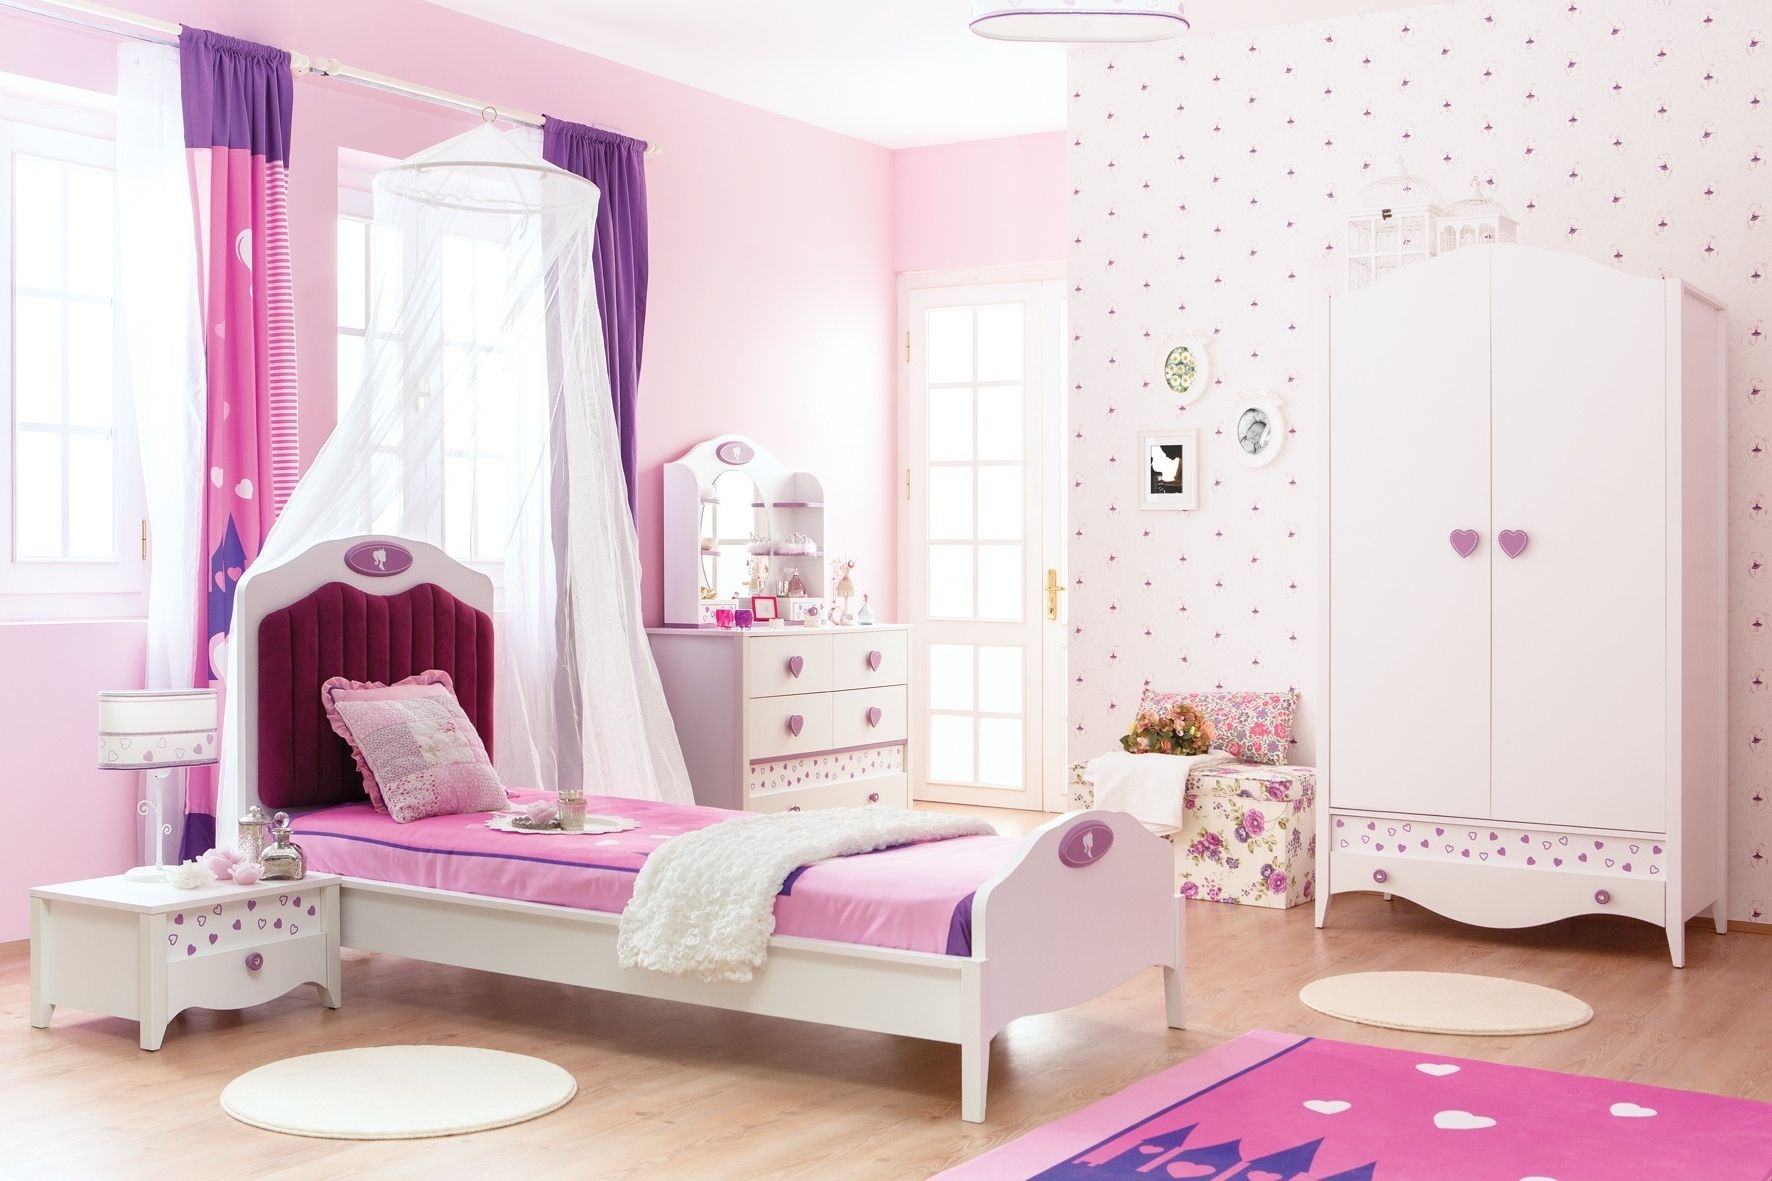 Newjoy Princess Girl's Bedroom Furniture Set With Regard To 2018 The Princess Wardrobes (View 10 of 11)